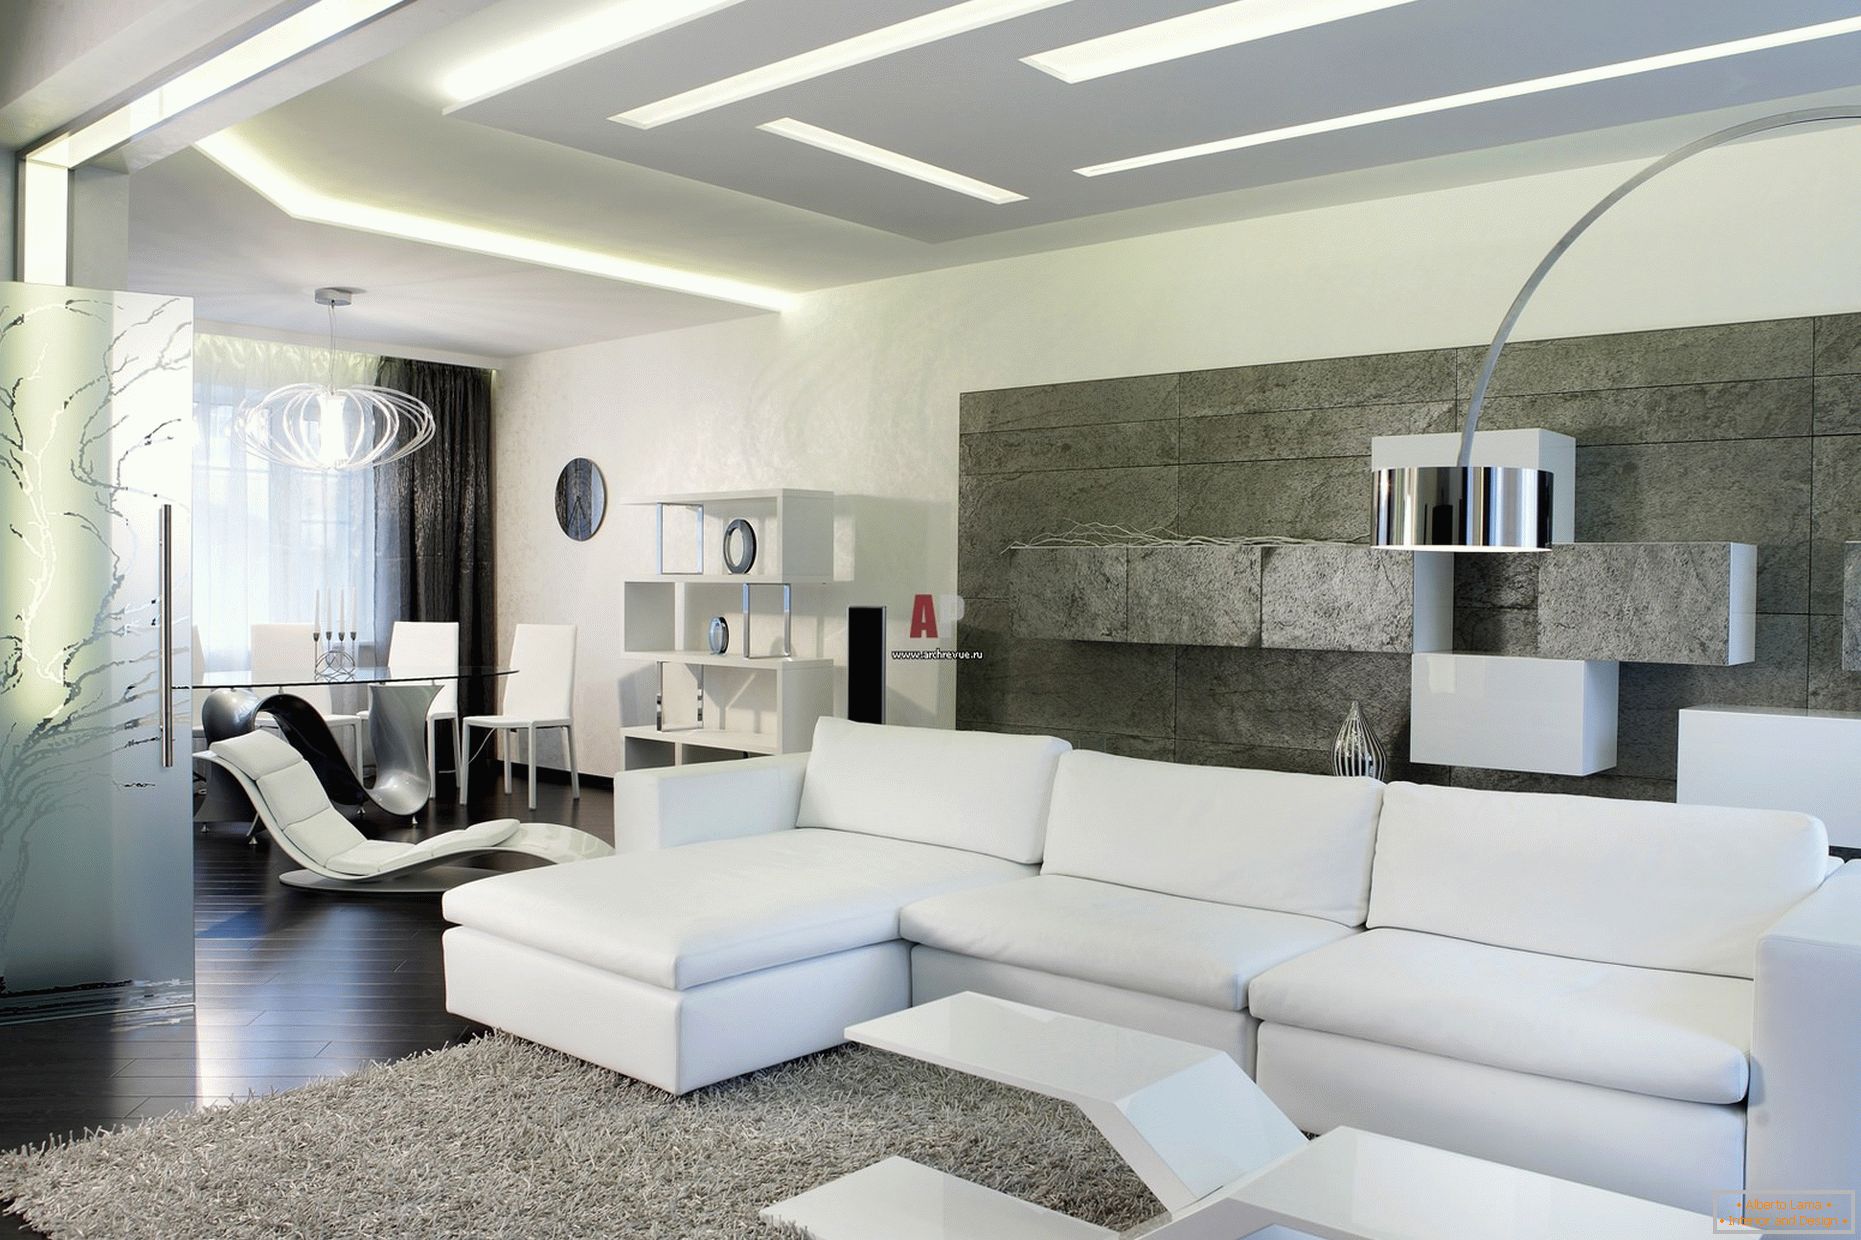 White interior of the guests of the room in a minimalist style is noteworthy for a modern, bold design with hints of high-tech.